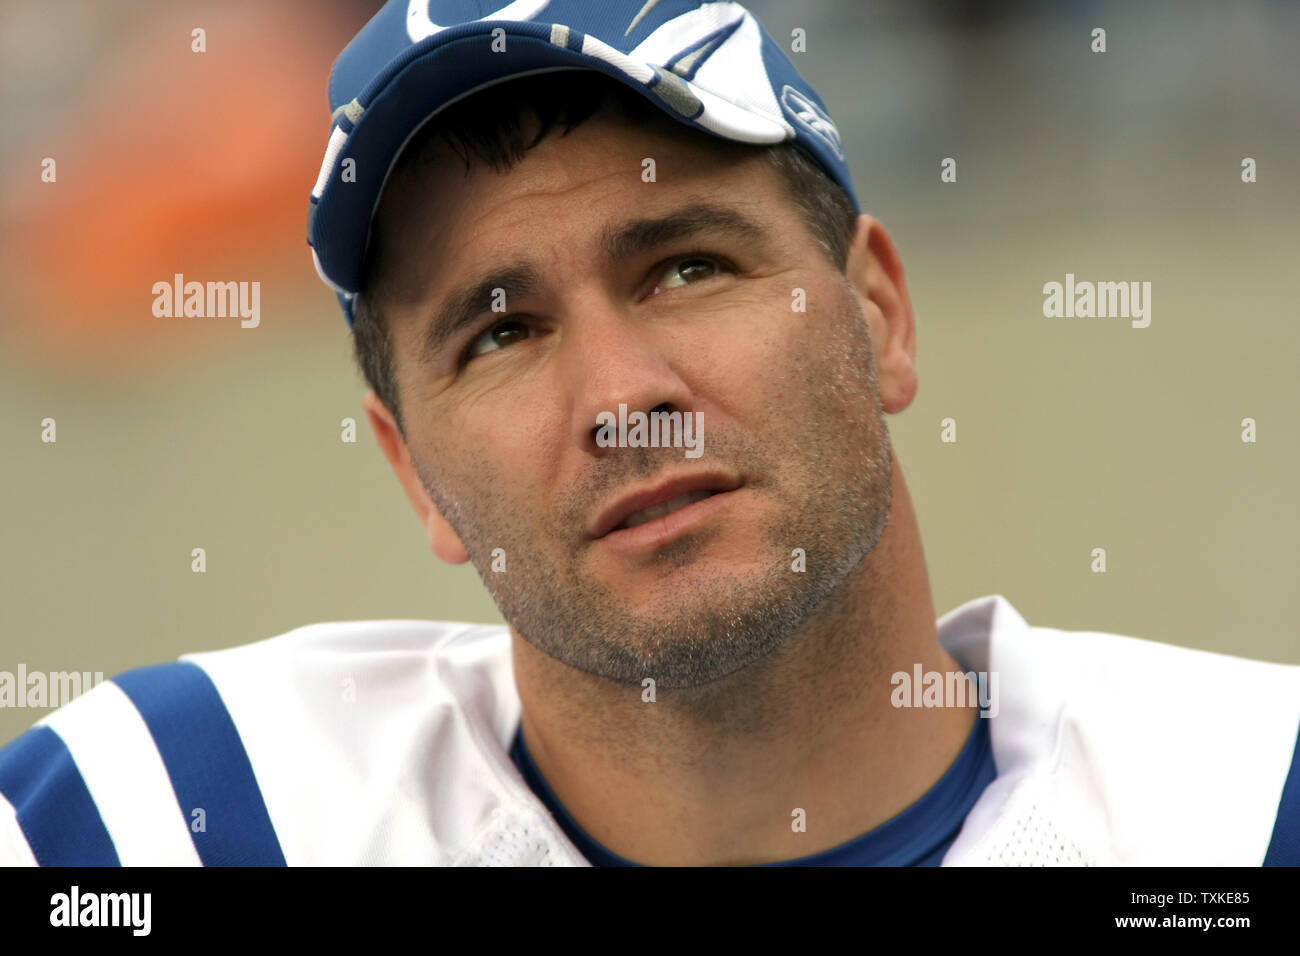 Indianapolis Colts kicker Adam Vinatieri walks the sidelines as the Colts defeat the  Panthers 31-7 at Bank of America Stadium in Charlotte, North Carolina. (UPI Photo/Nell Redmond) Stock Photo